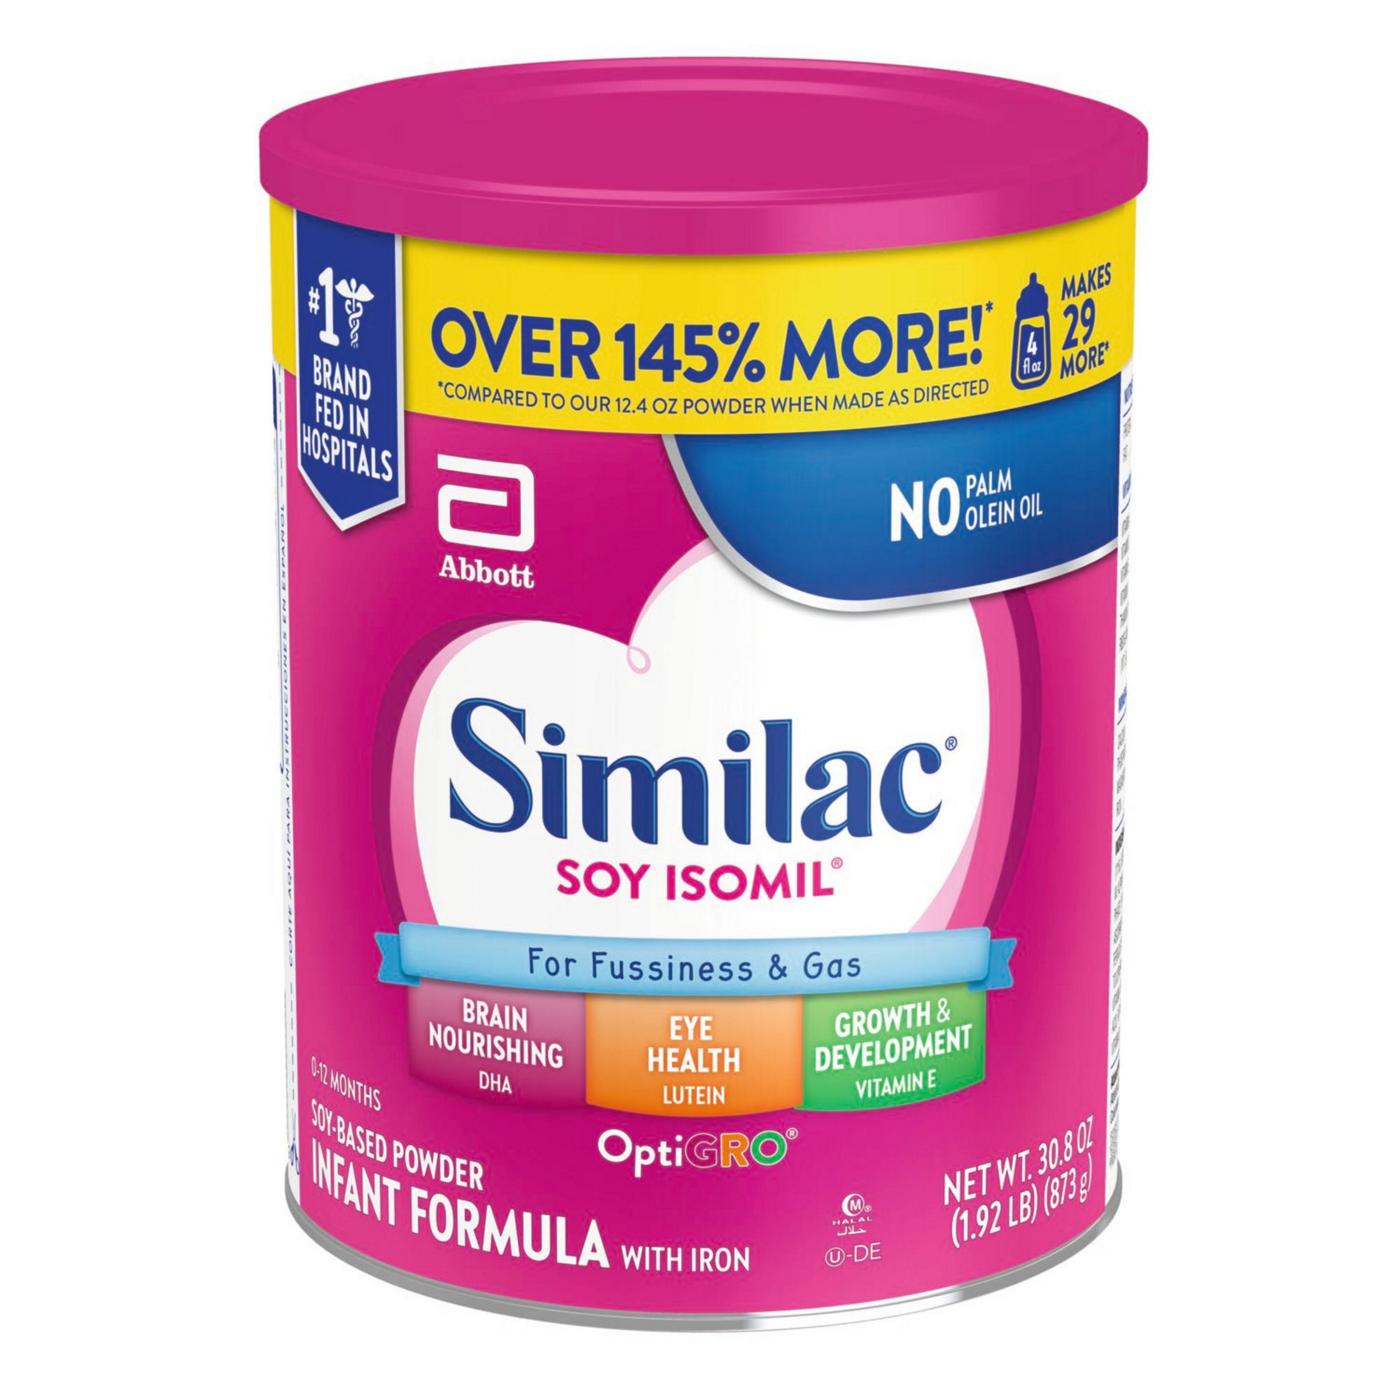 Similac Soy Isomil For Fussiness and Gas Infant Formula with Iron Powder; image 5 of 9